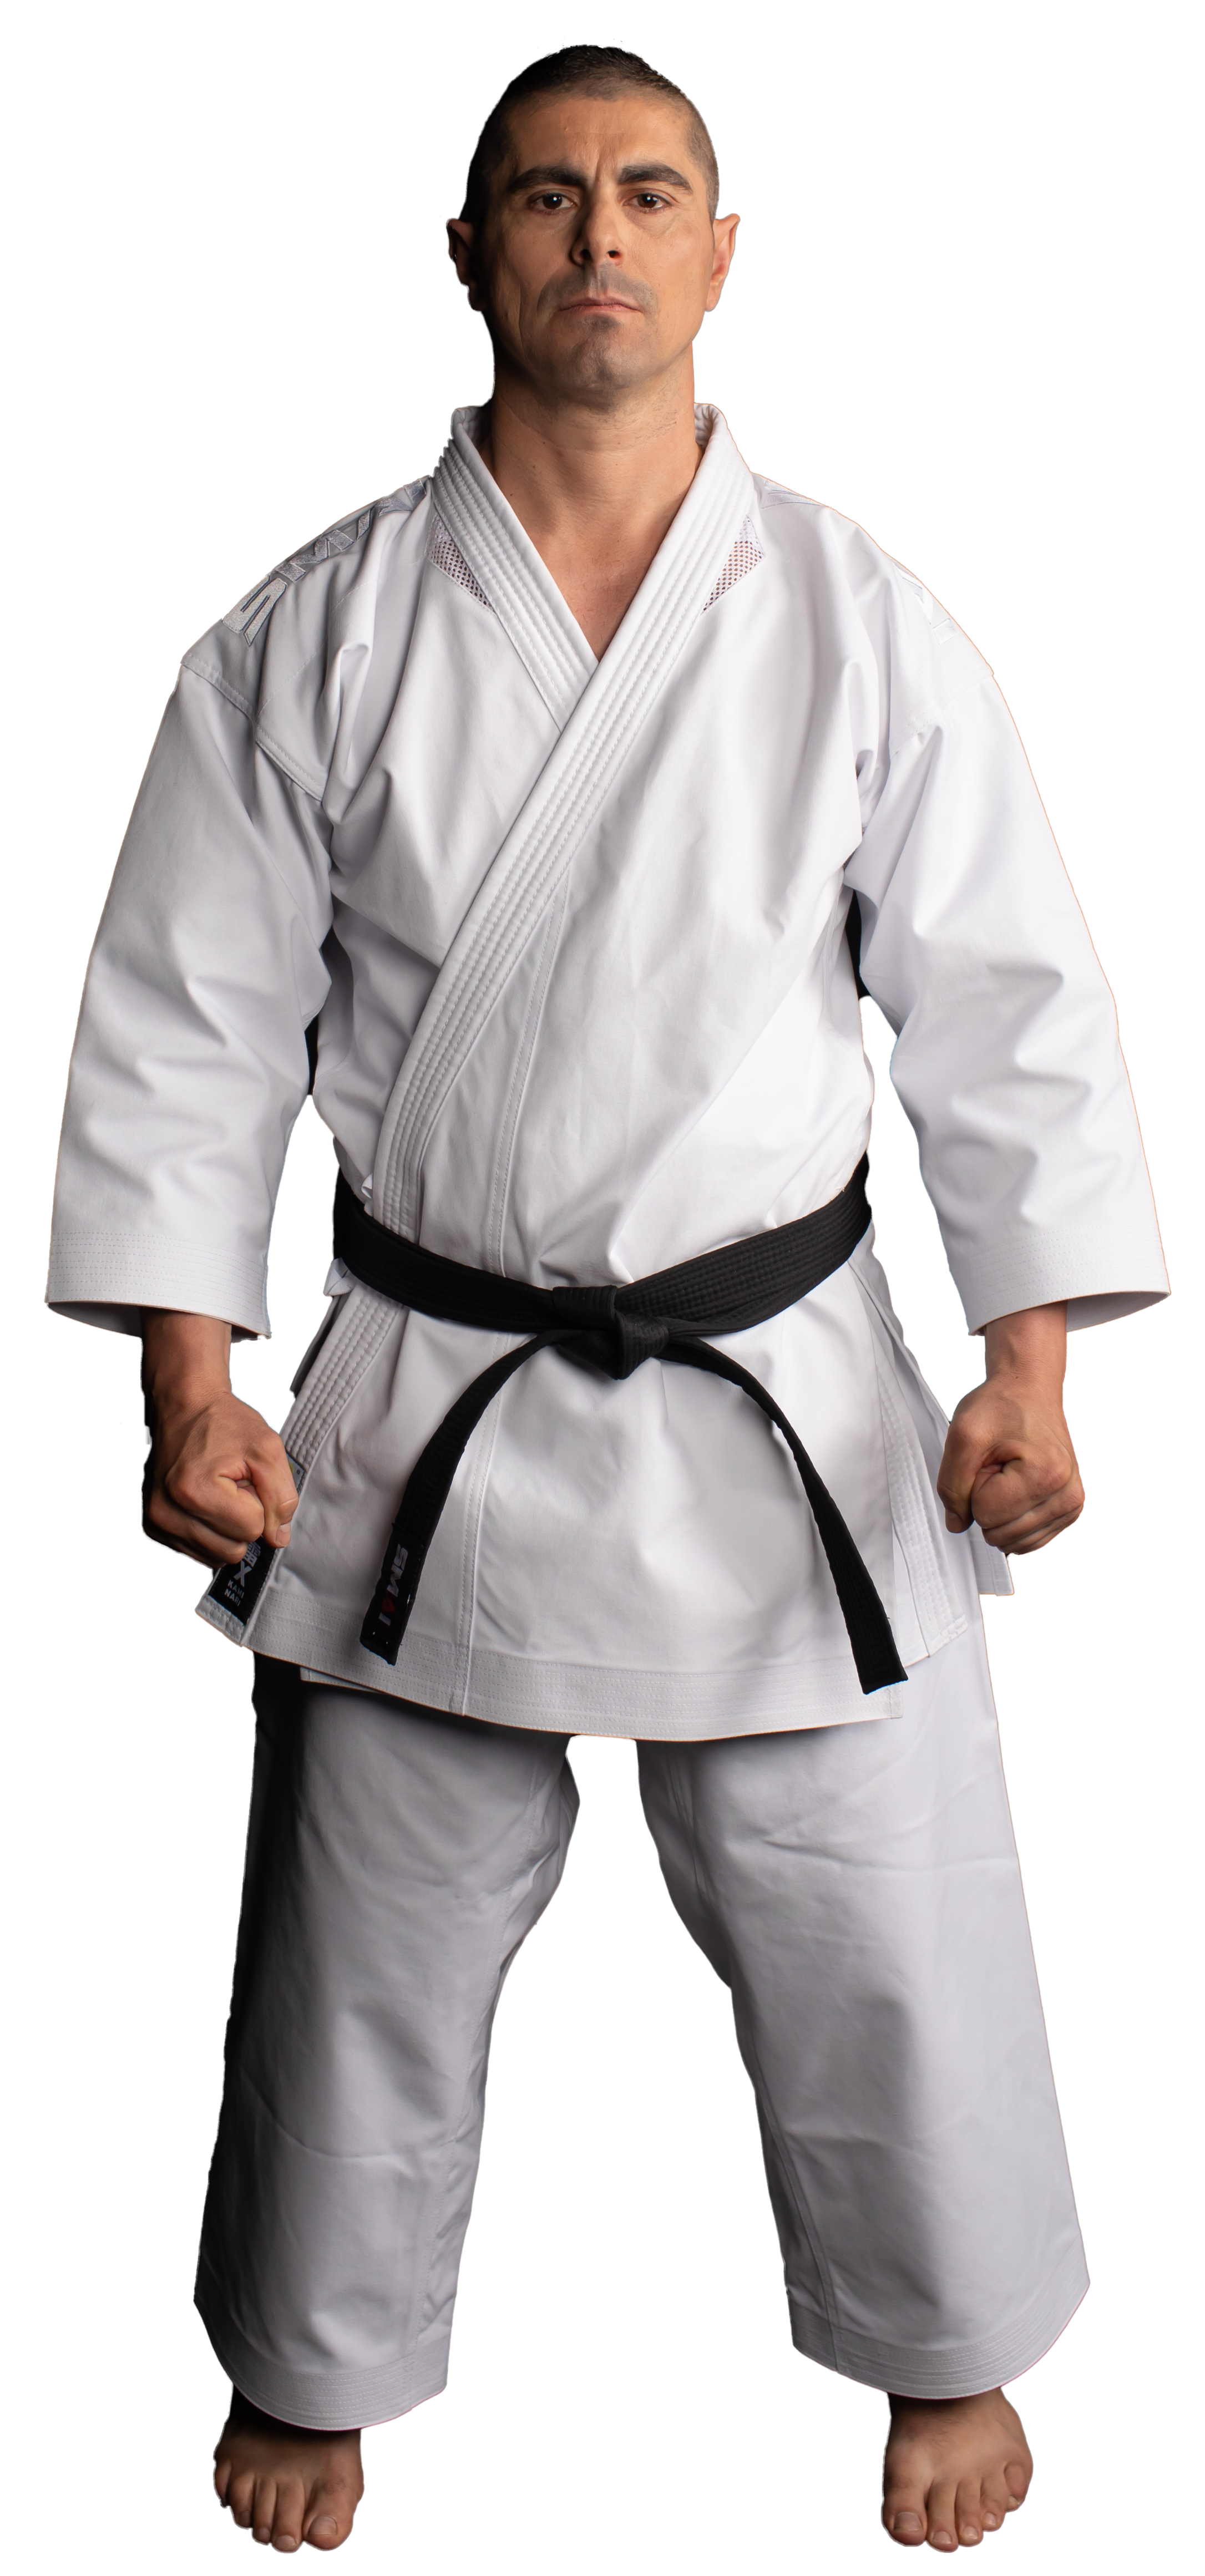 8 oz. Middleweight Uniform with Elastic Pant – Century Martial Arts